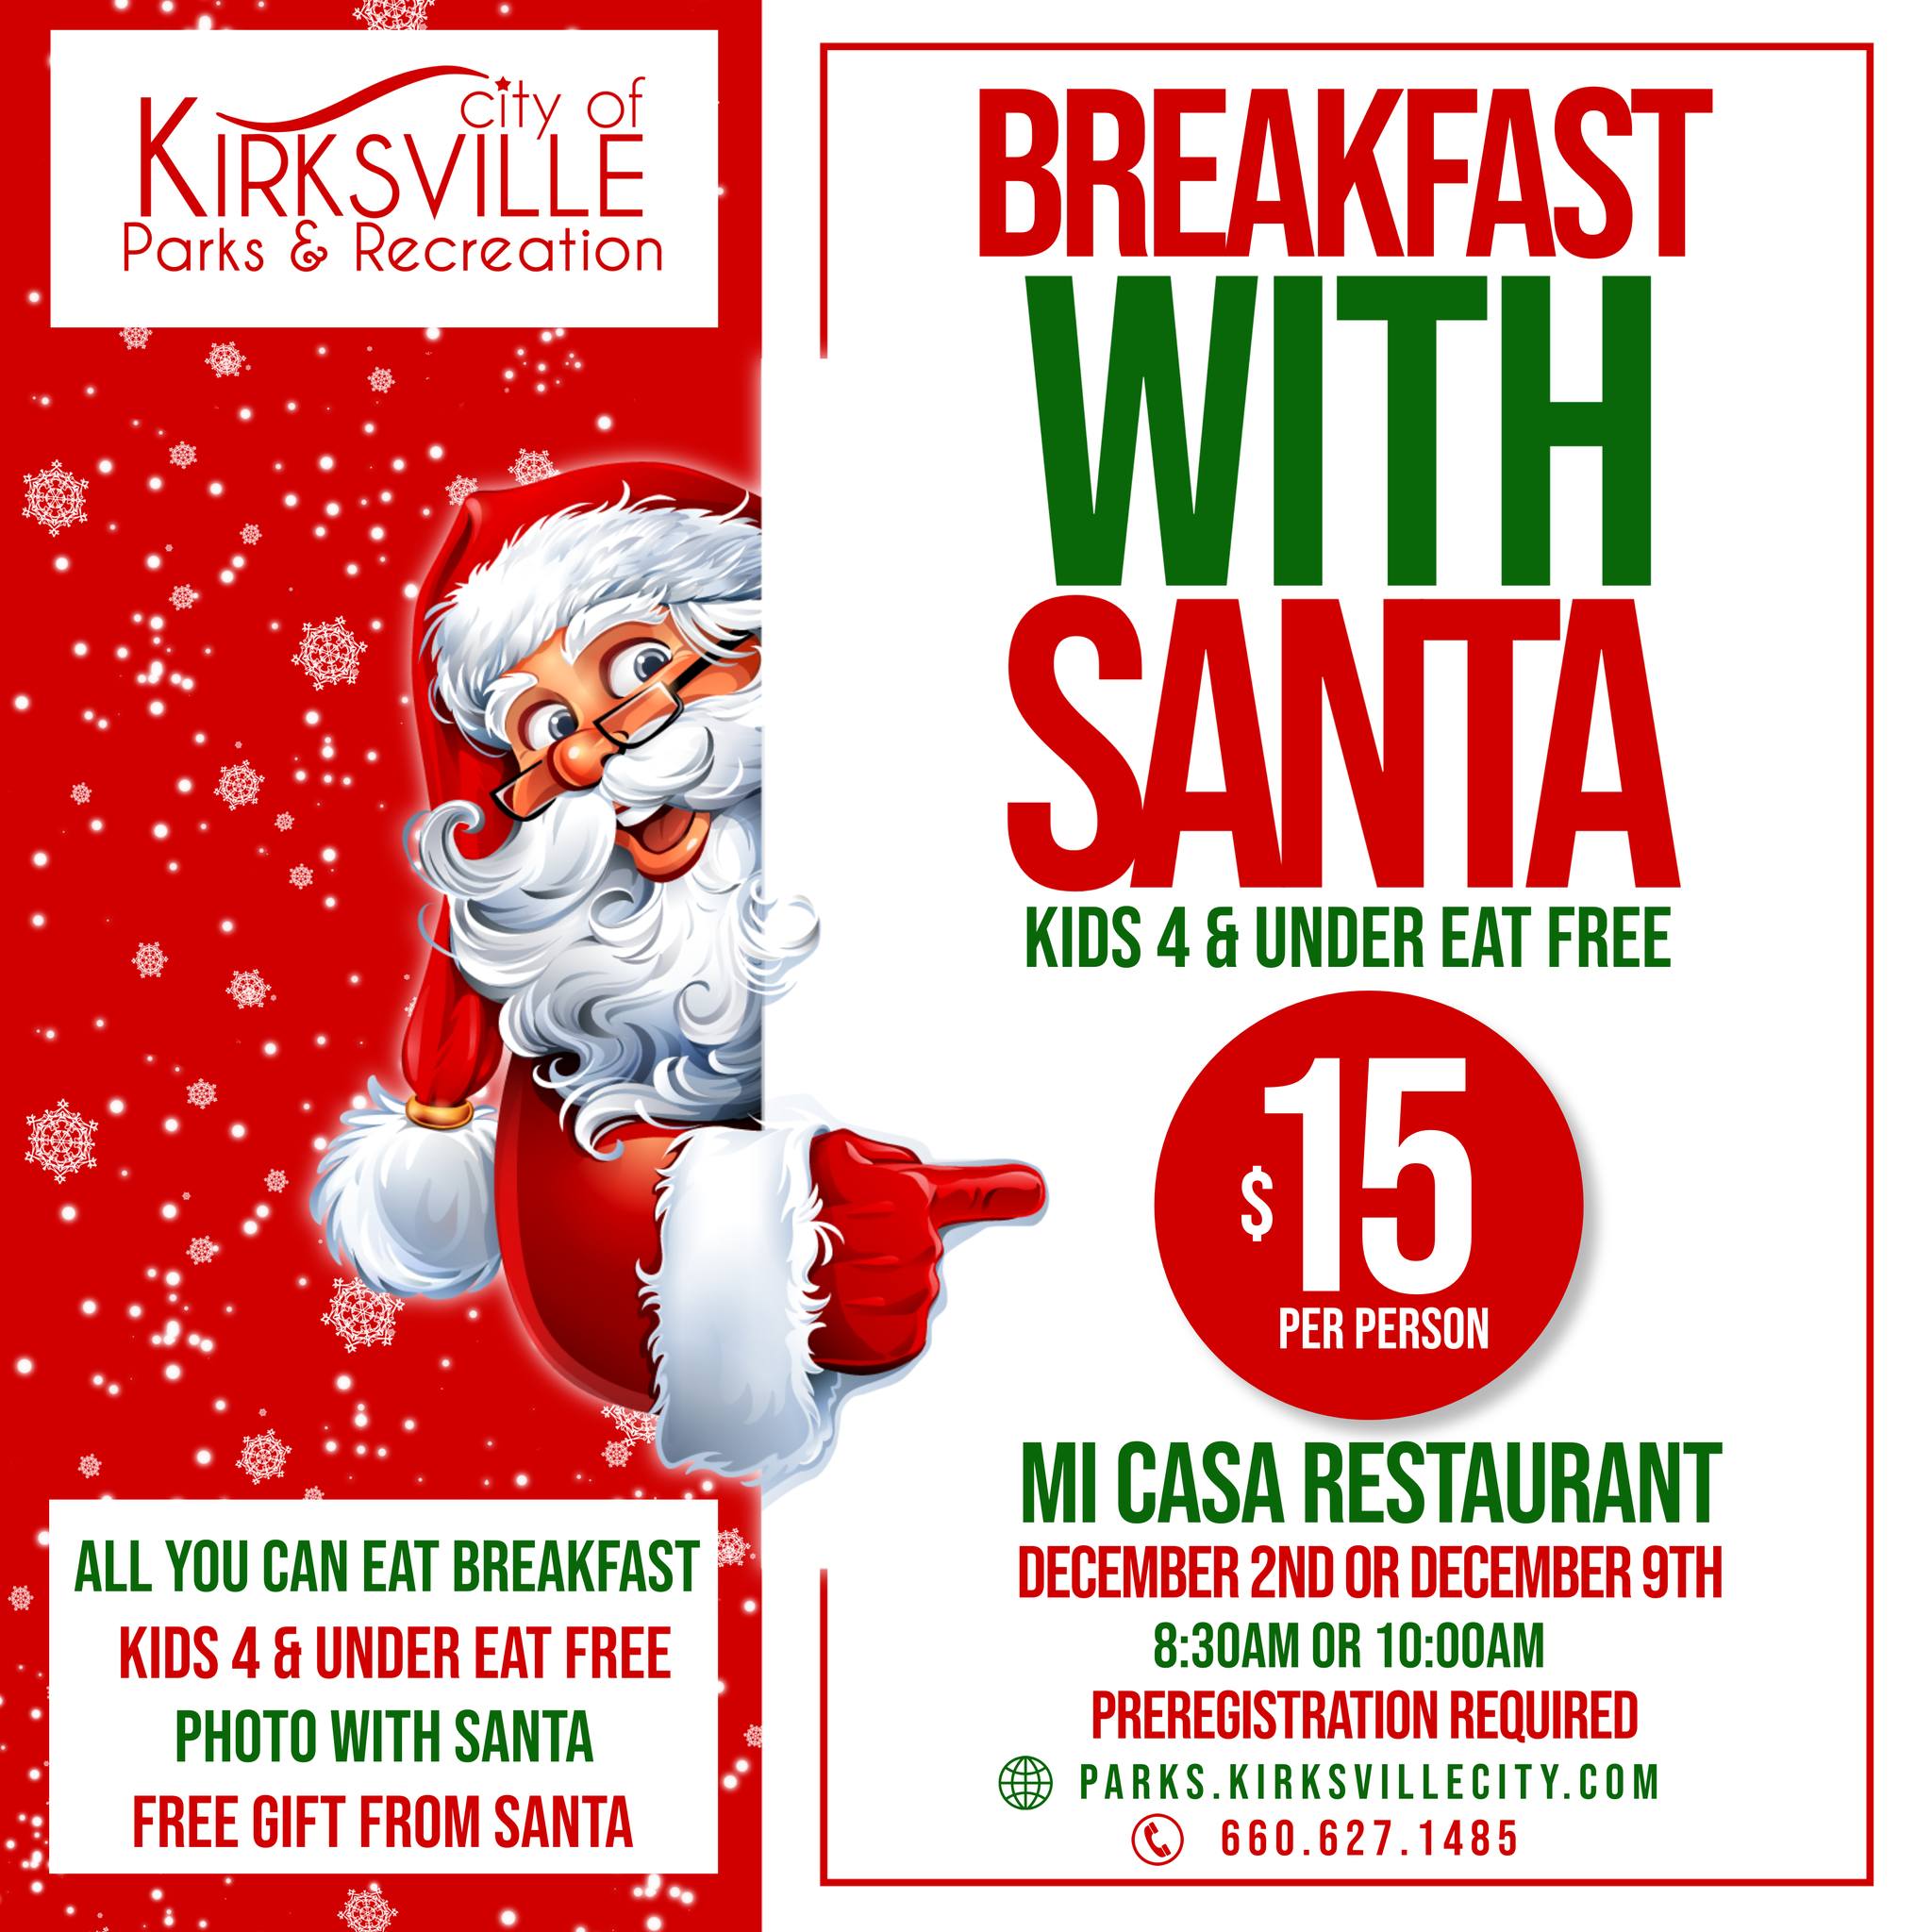 Check more about Breakfast with Santa